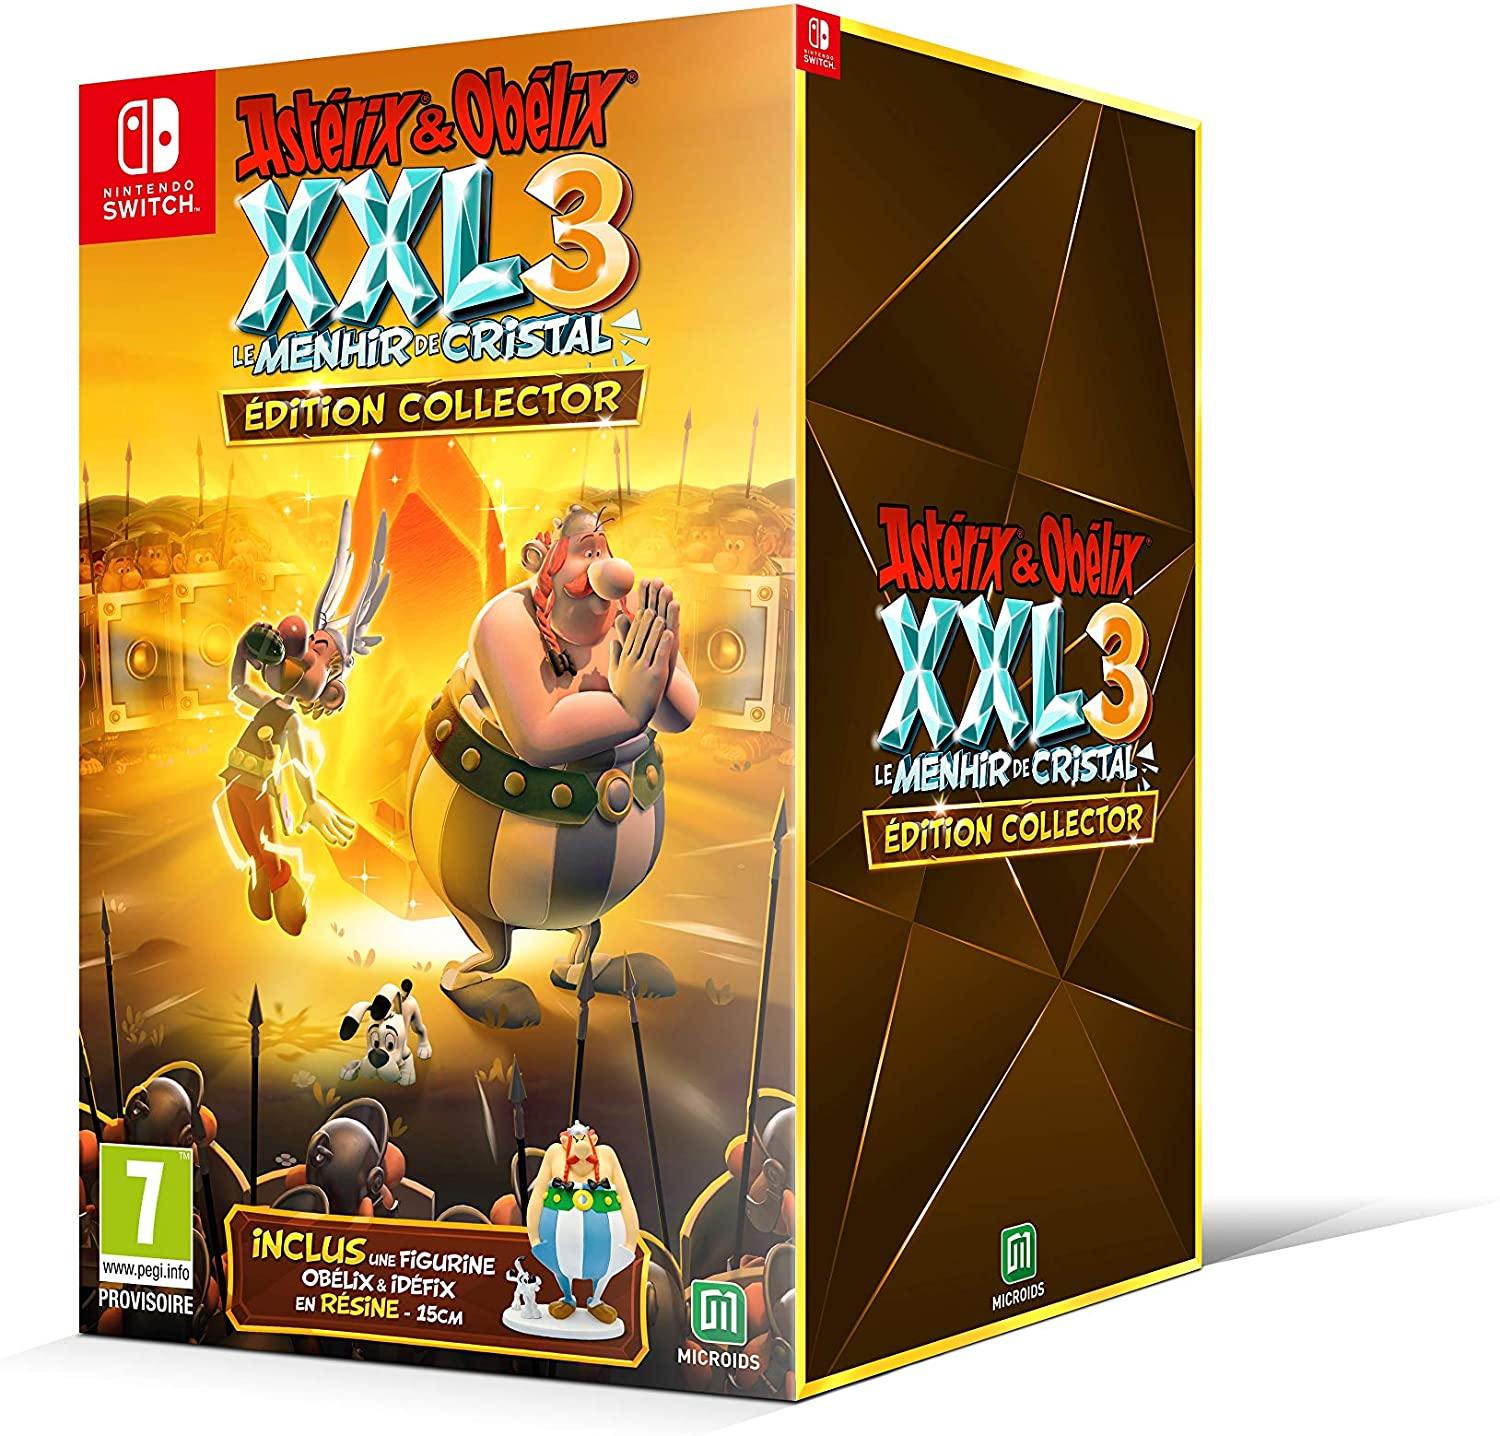 Â Asterix & Obelix XXL 3: The Crystal Menhir Collector's Edition (Switch) - flash vidéo